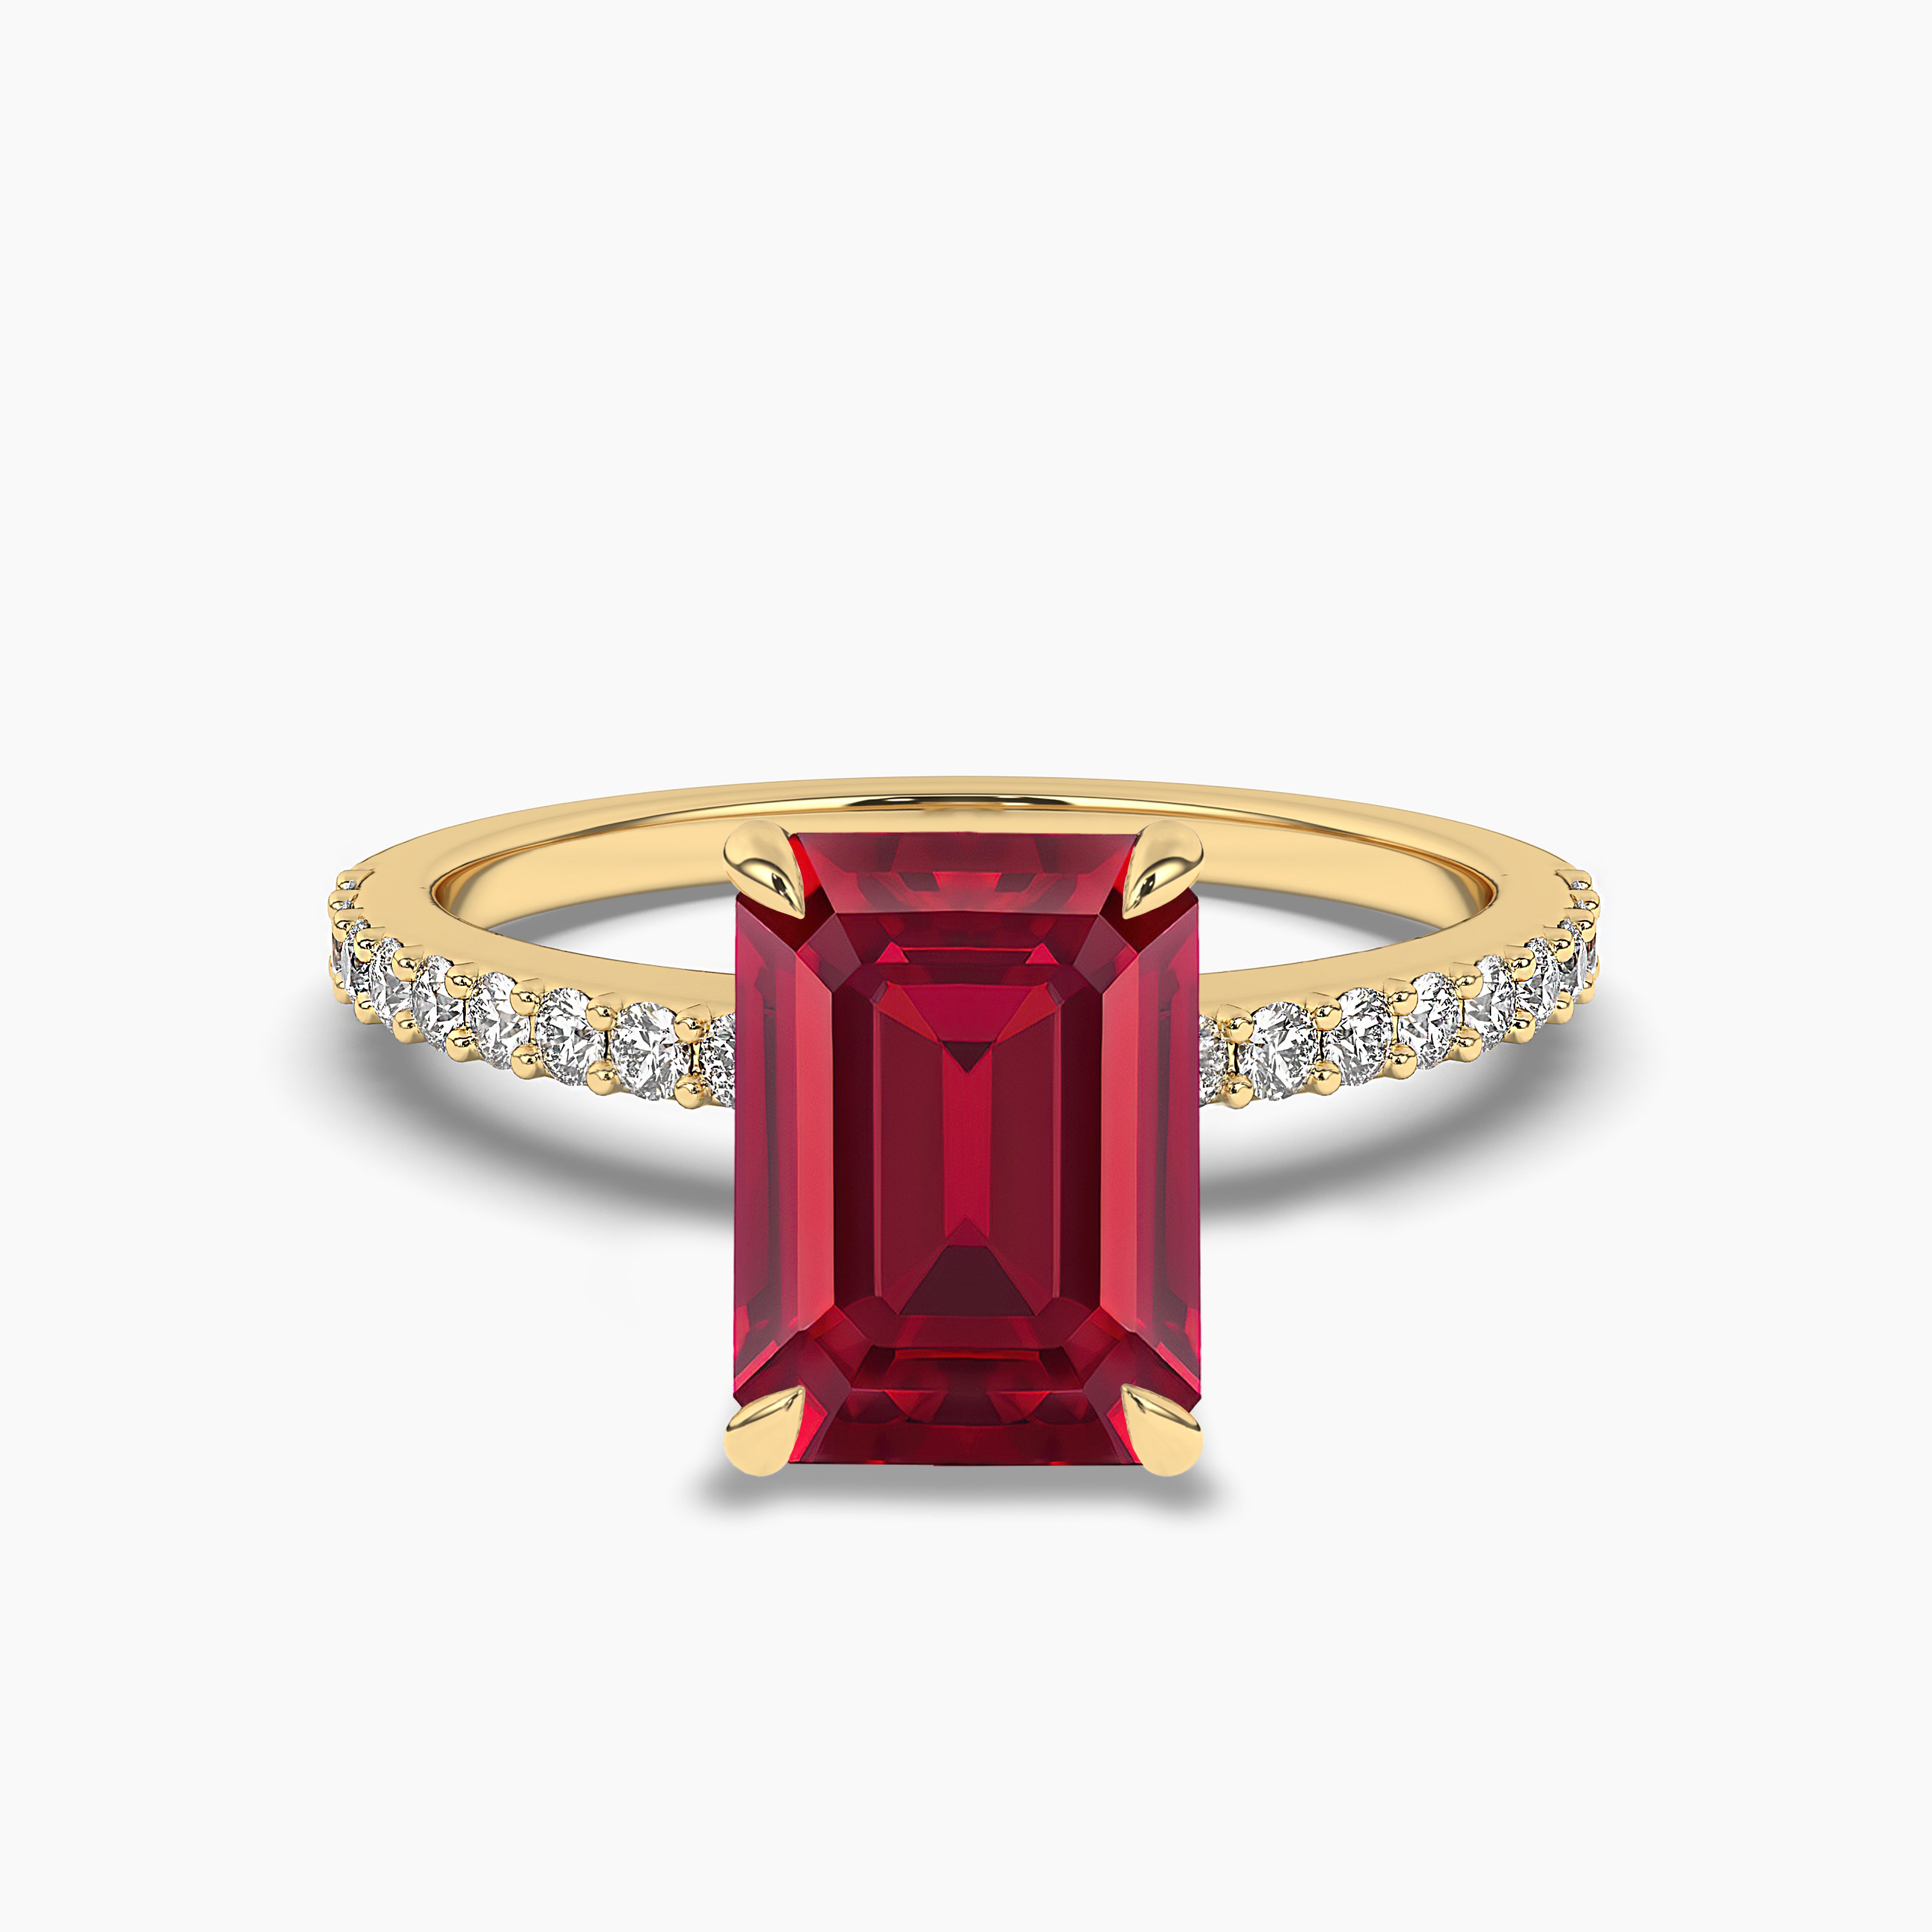 Emerald Cut Ruby gemstone Ring with Pave Diamond Band